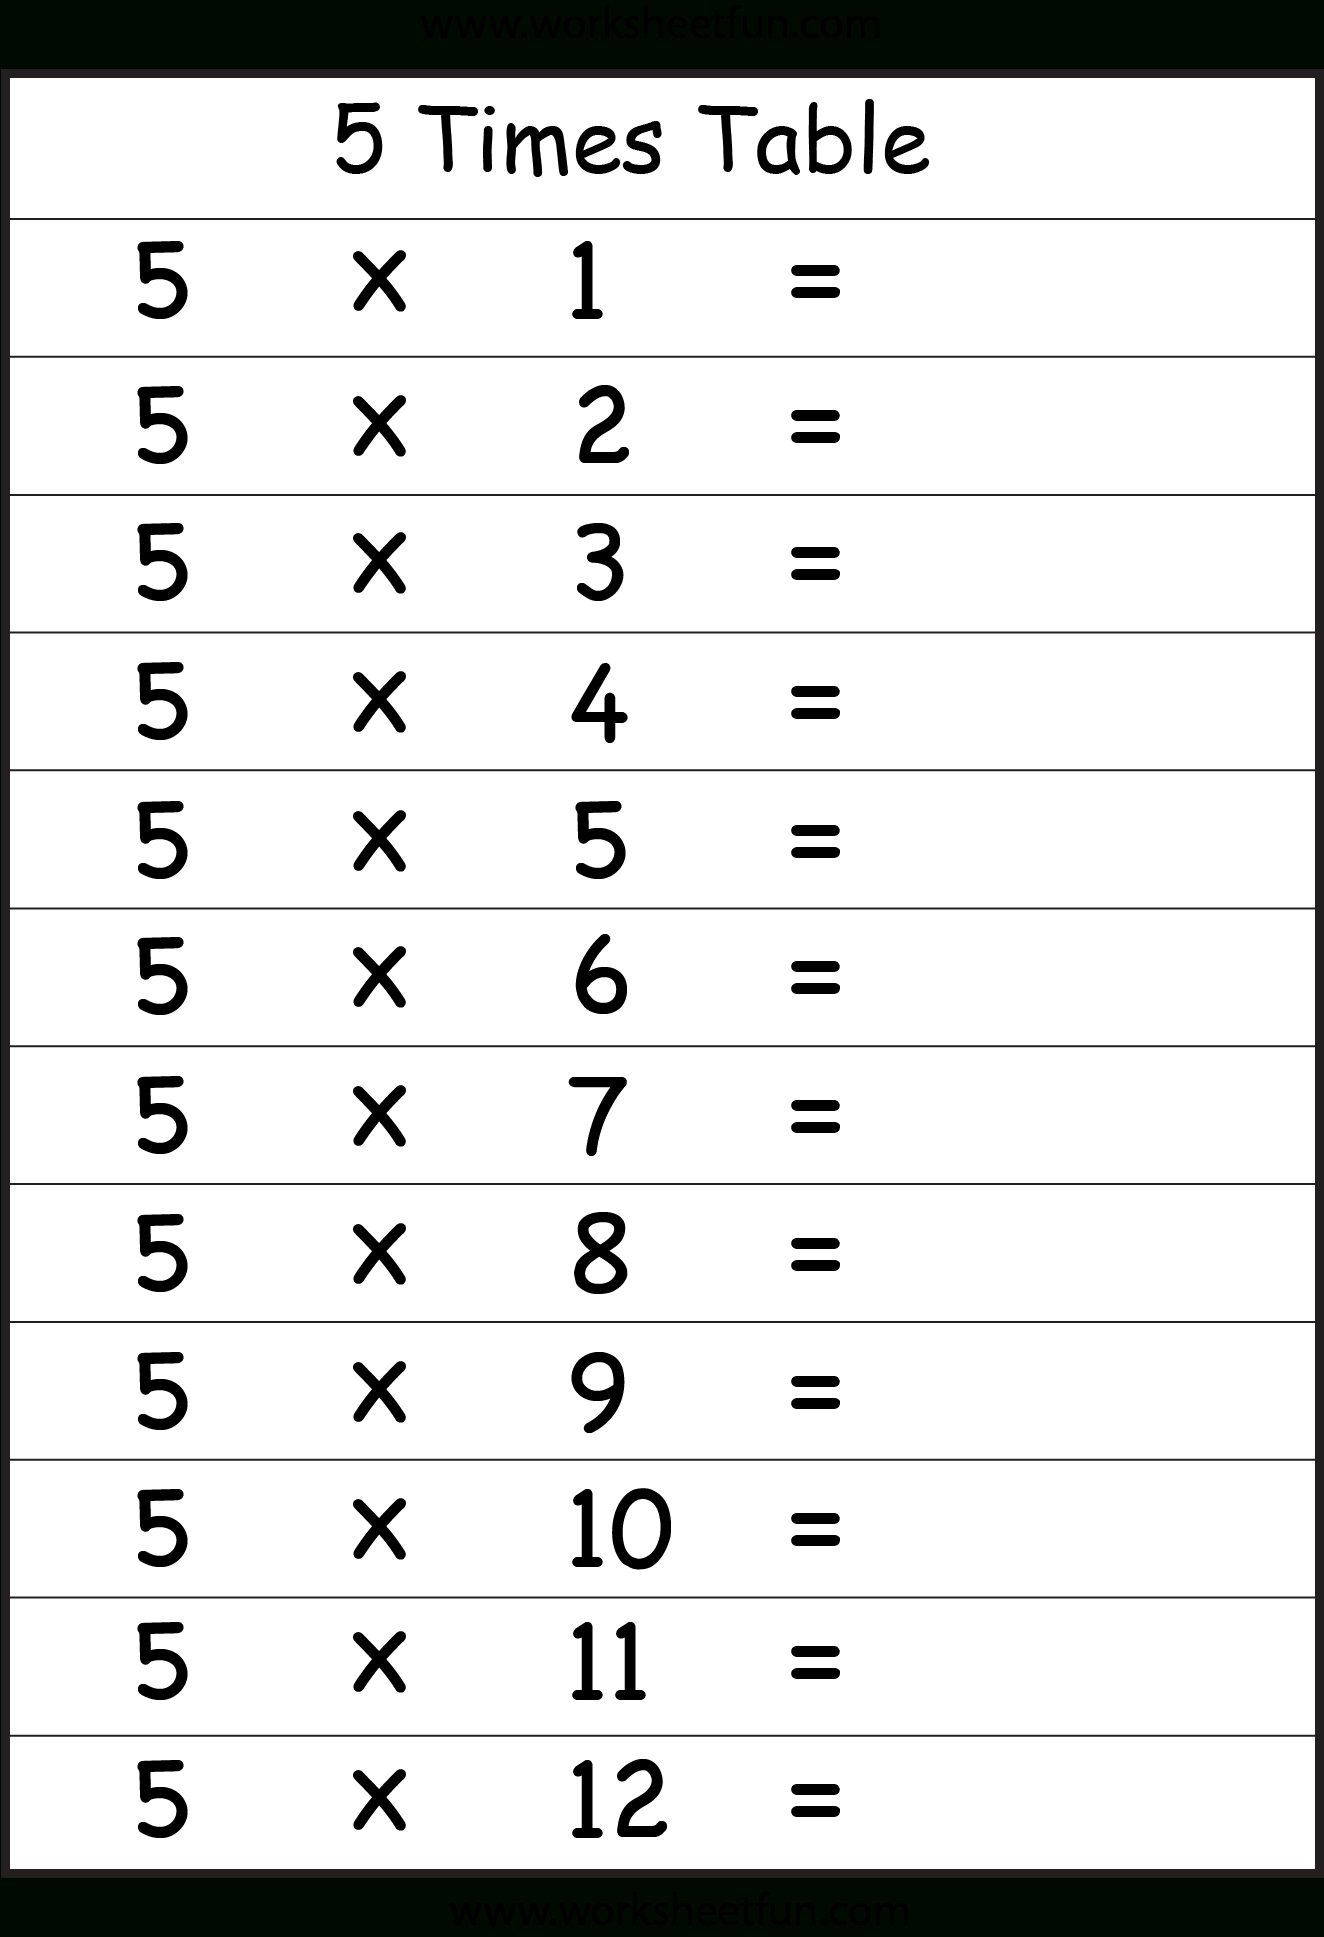 Multiplication Times Tables Worksheets – 2, 3, 4, 5, 6, 7, 8 within Printable Multiplication Table 5